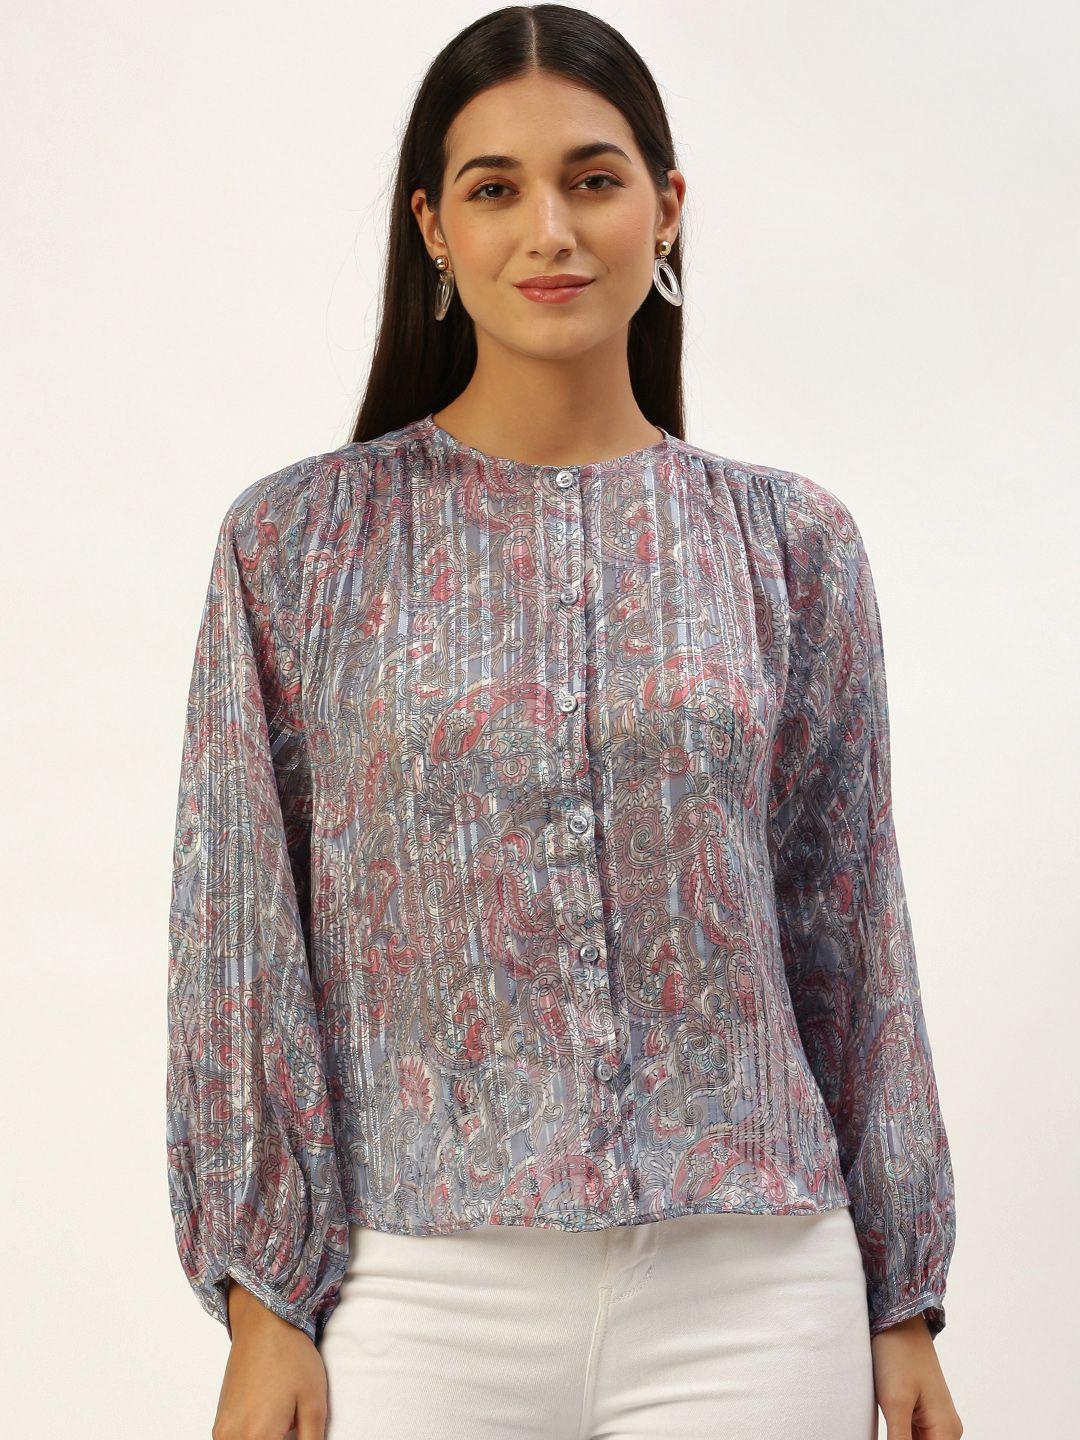 roving mode ethnic motifs print georgette shirt style top